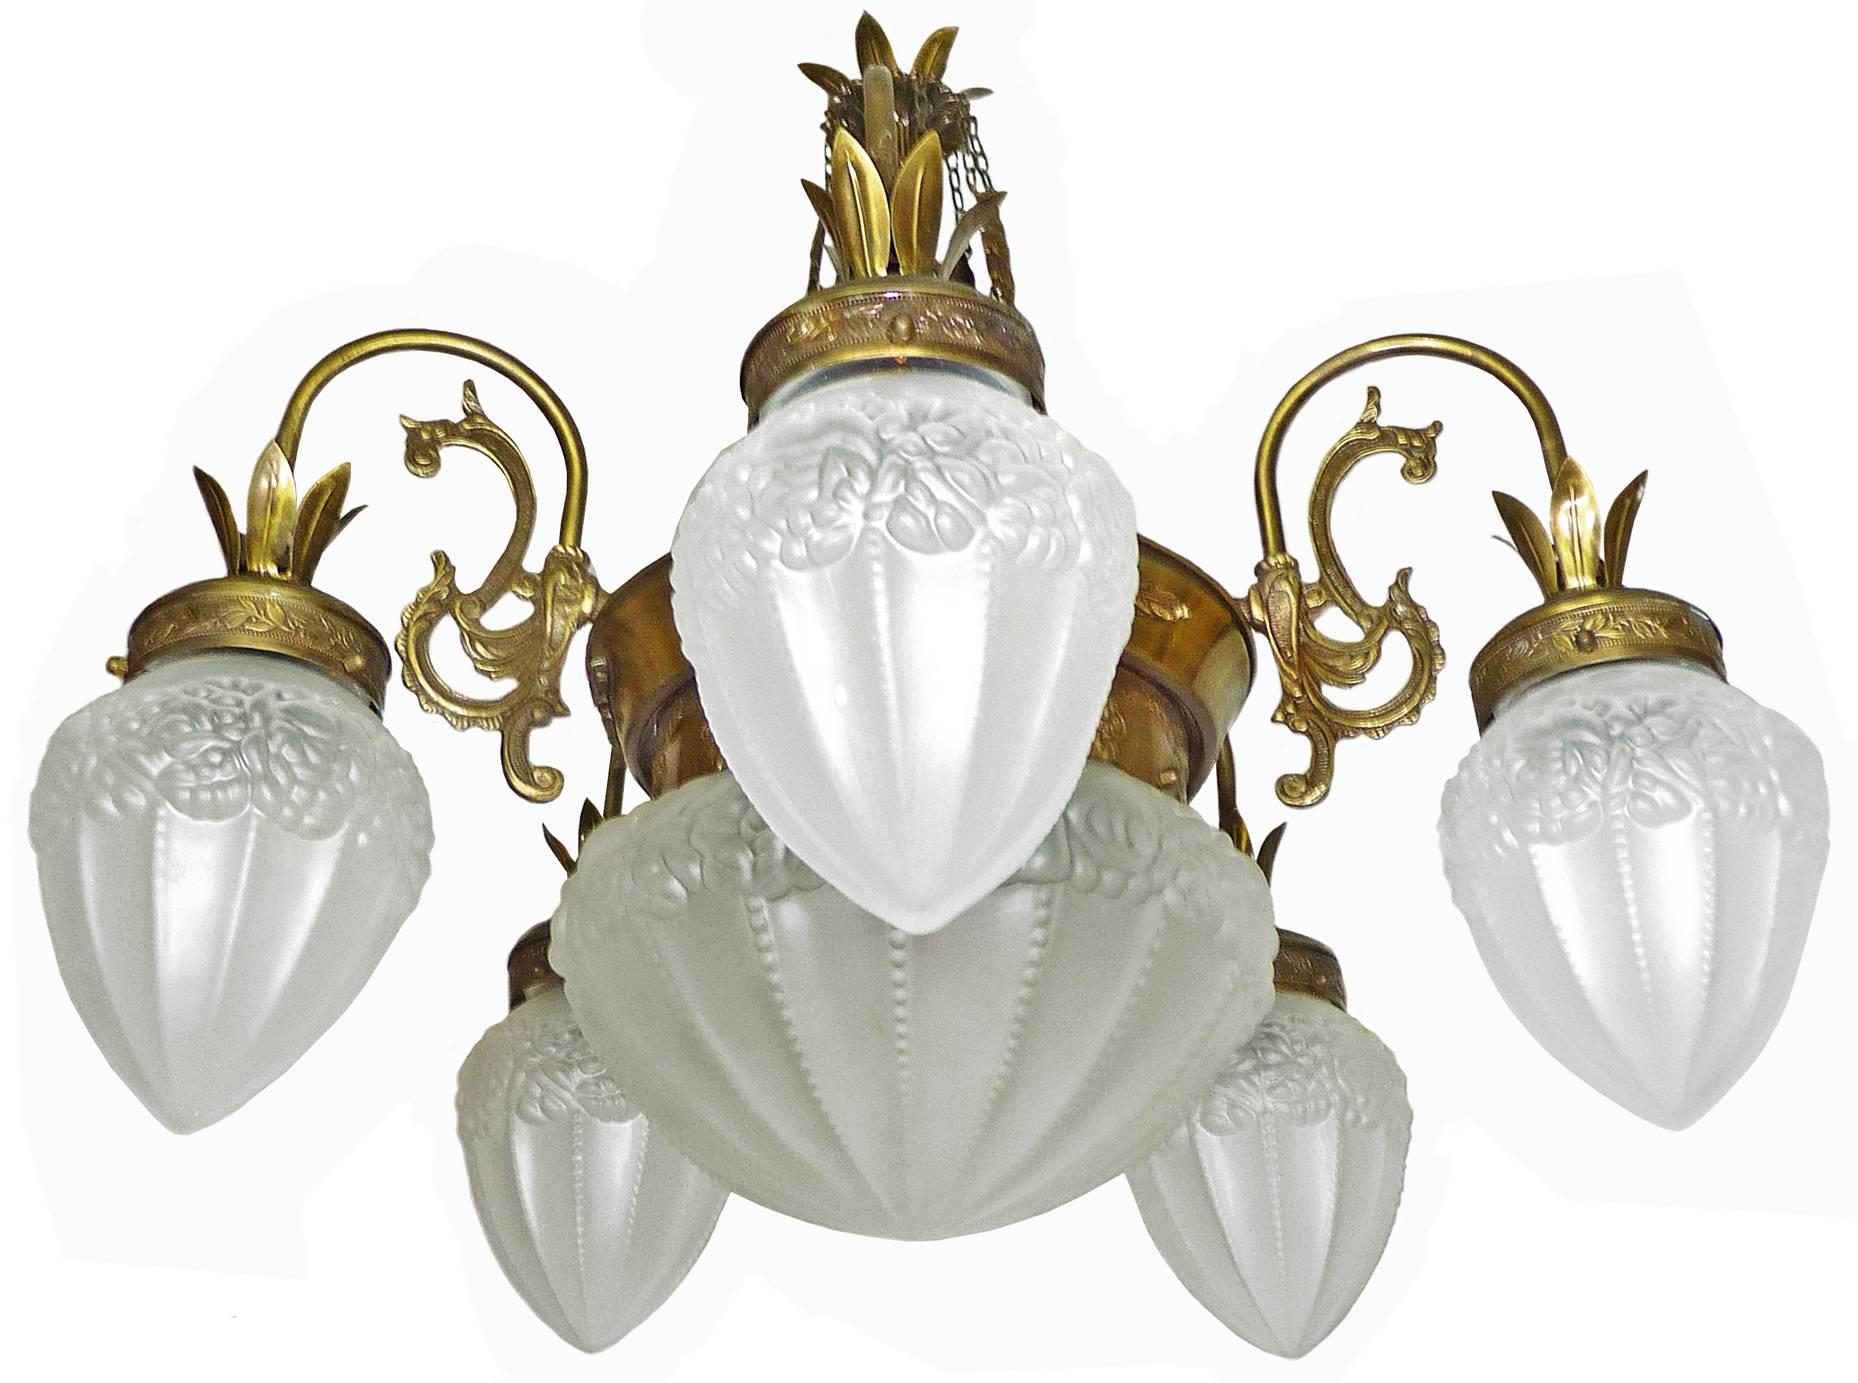 French Degué style Art Deco white frosted glass, six-light brass chandelier/ gold and bronze color with patina.
Six bulbs (five bulbs E14 40W and one bulb E27 60W)
Good working condition
Measures: Diameter 28.5 in / 72 cm
Height 32 in / 80